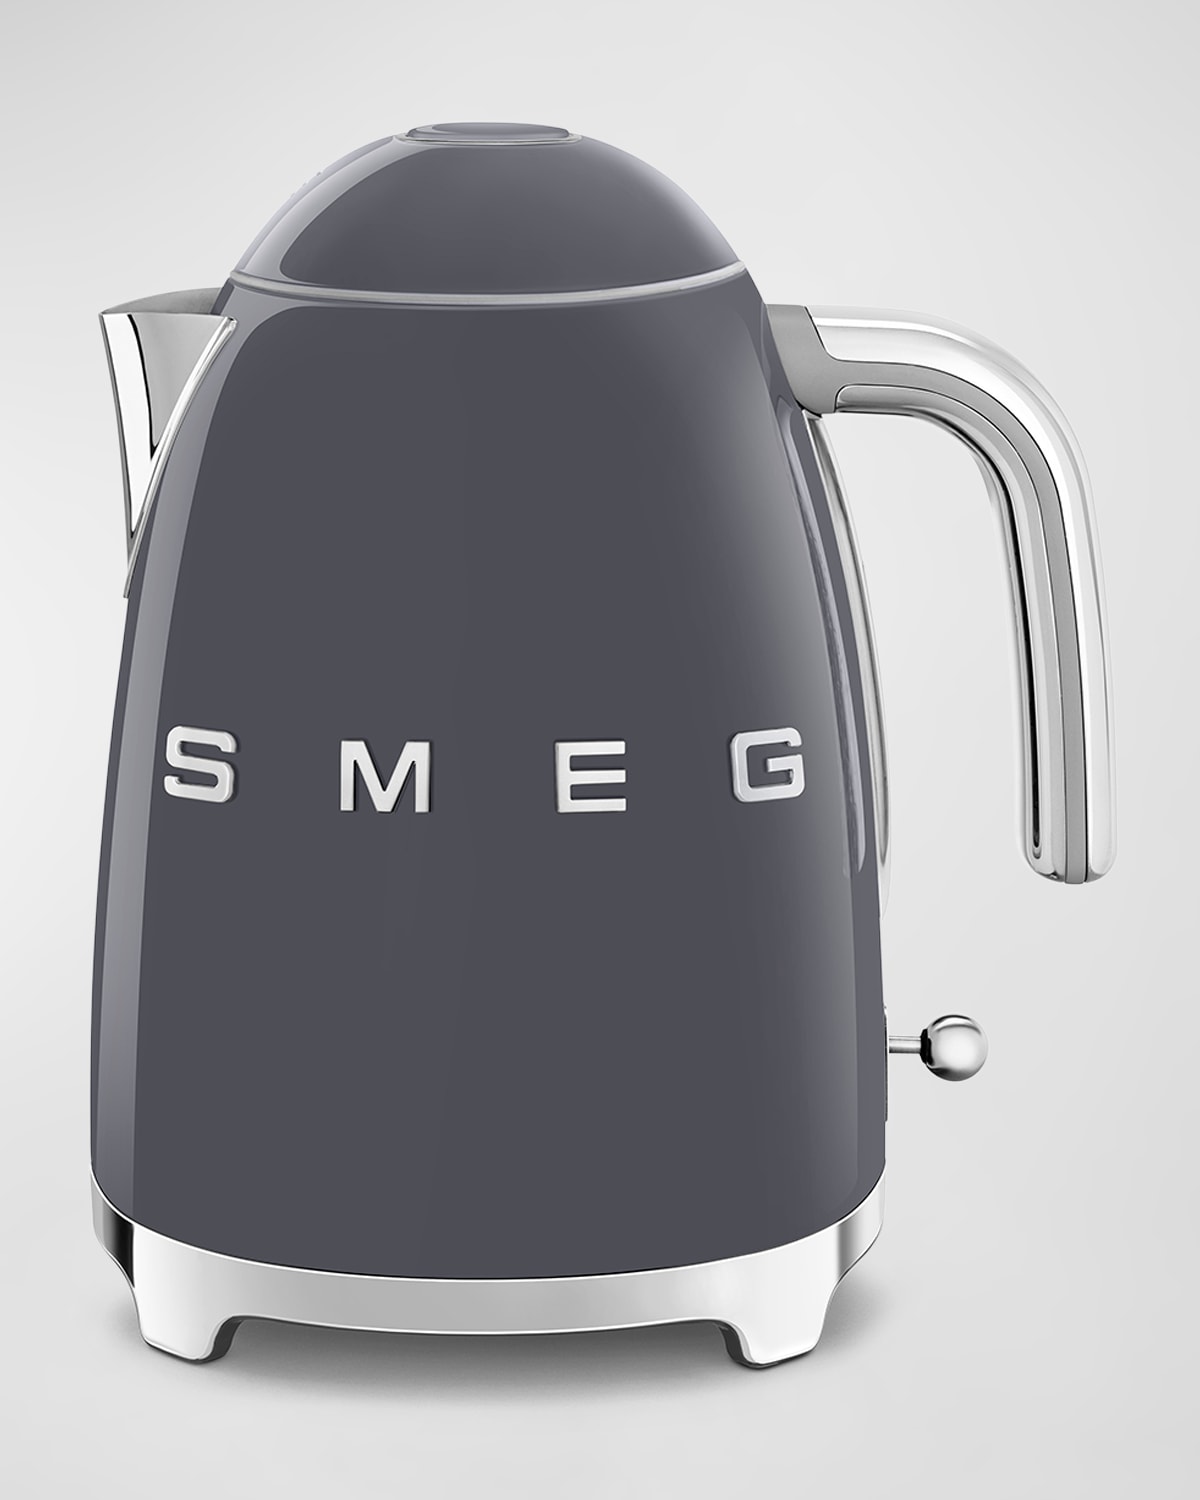 Smeg Electric Stainless Steel Kettle In Slate Grey